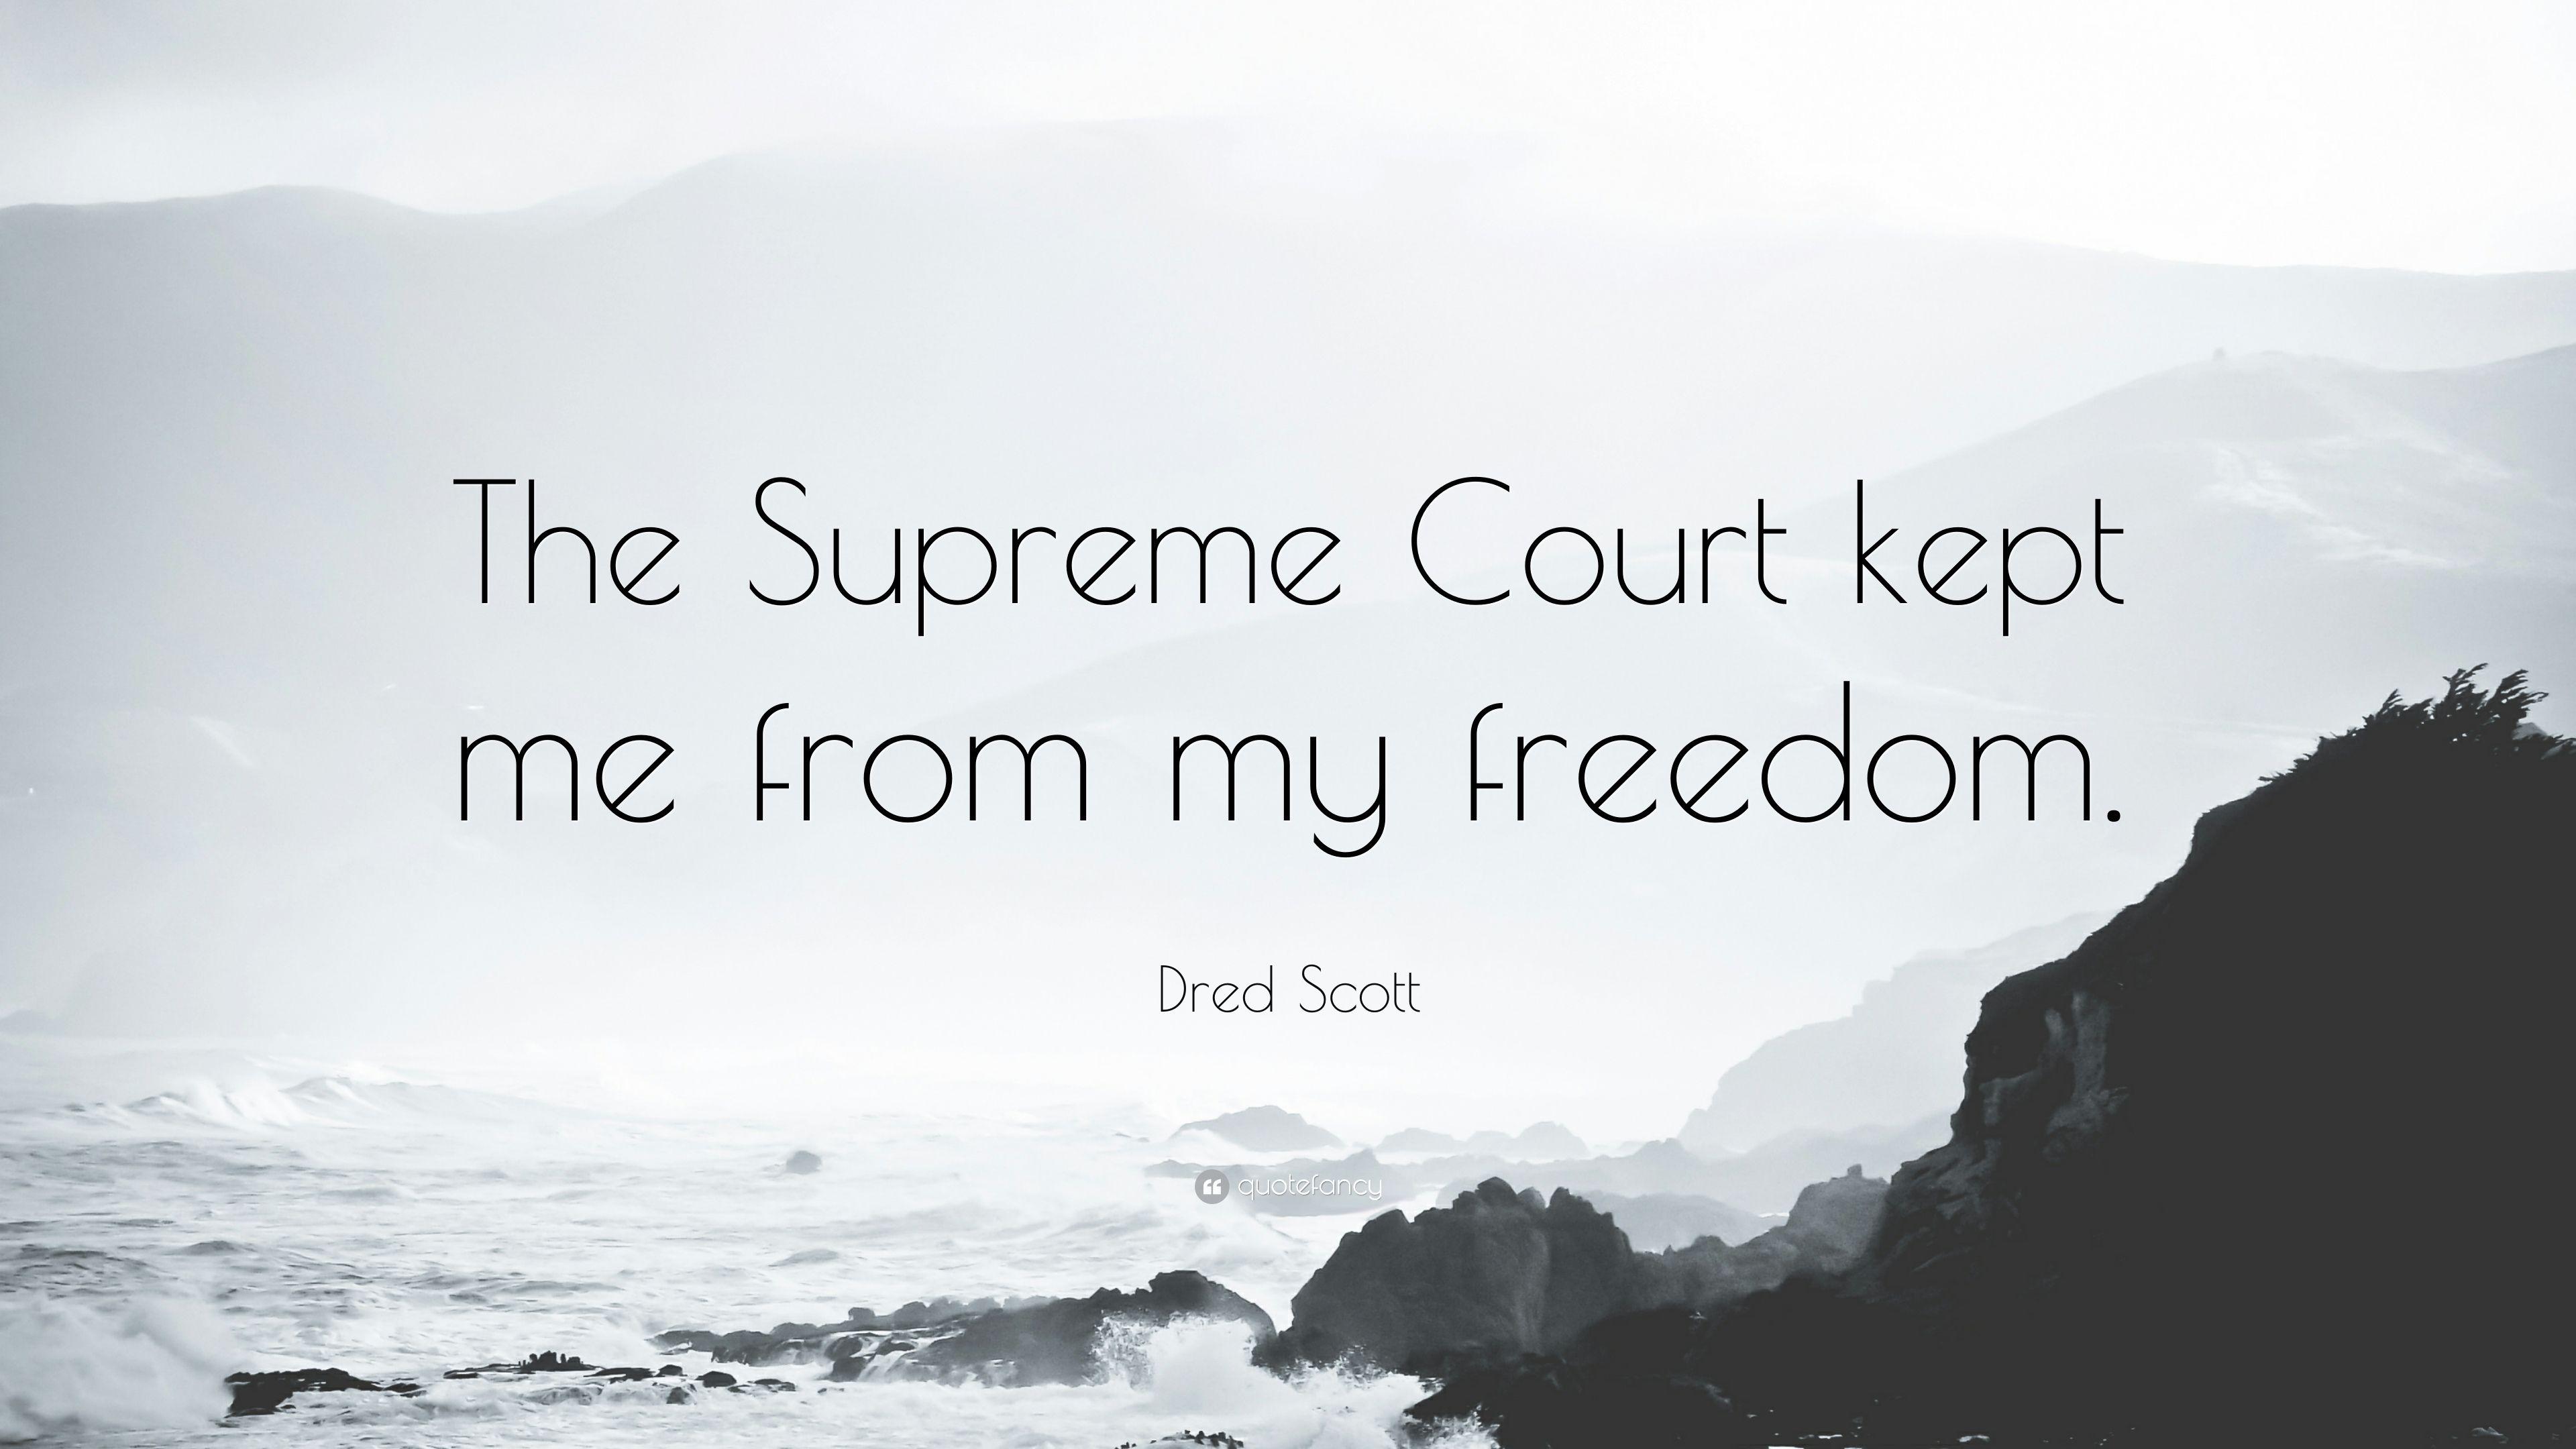 Dred Scott Quote: “The Supreme Court kept me from my freedom.” 7